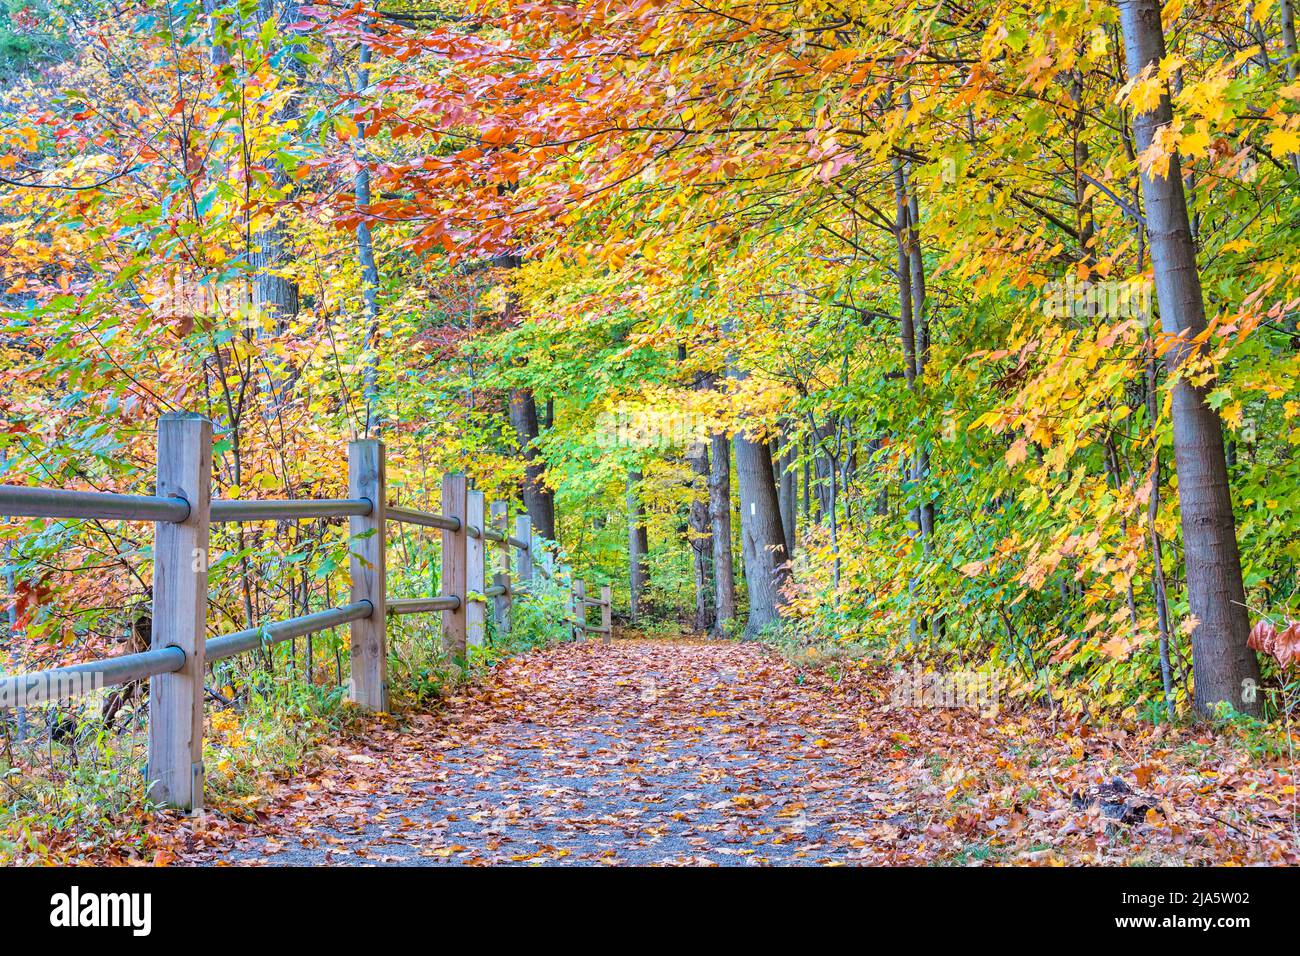 Forest path during autumn with tree leaves changing colors. Stock Photo